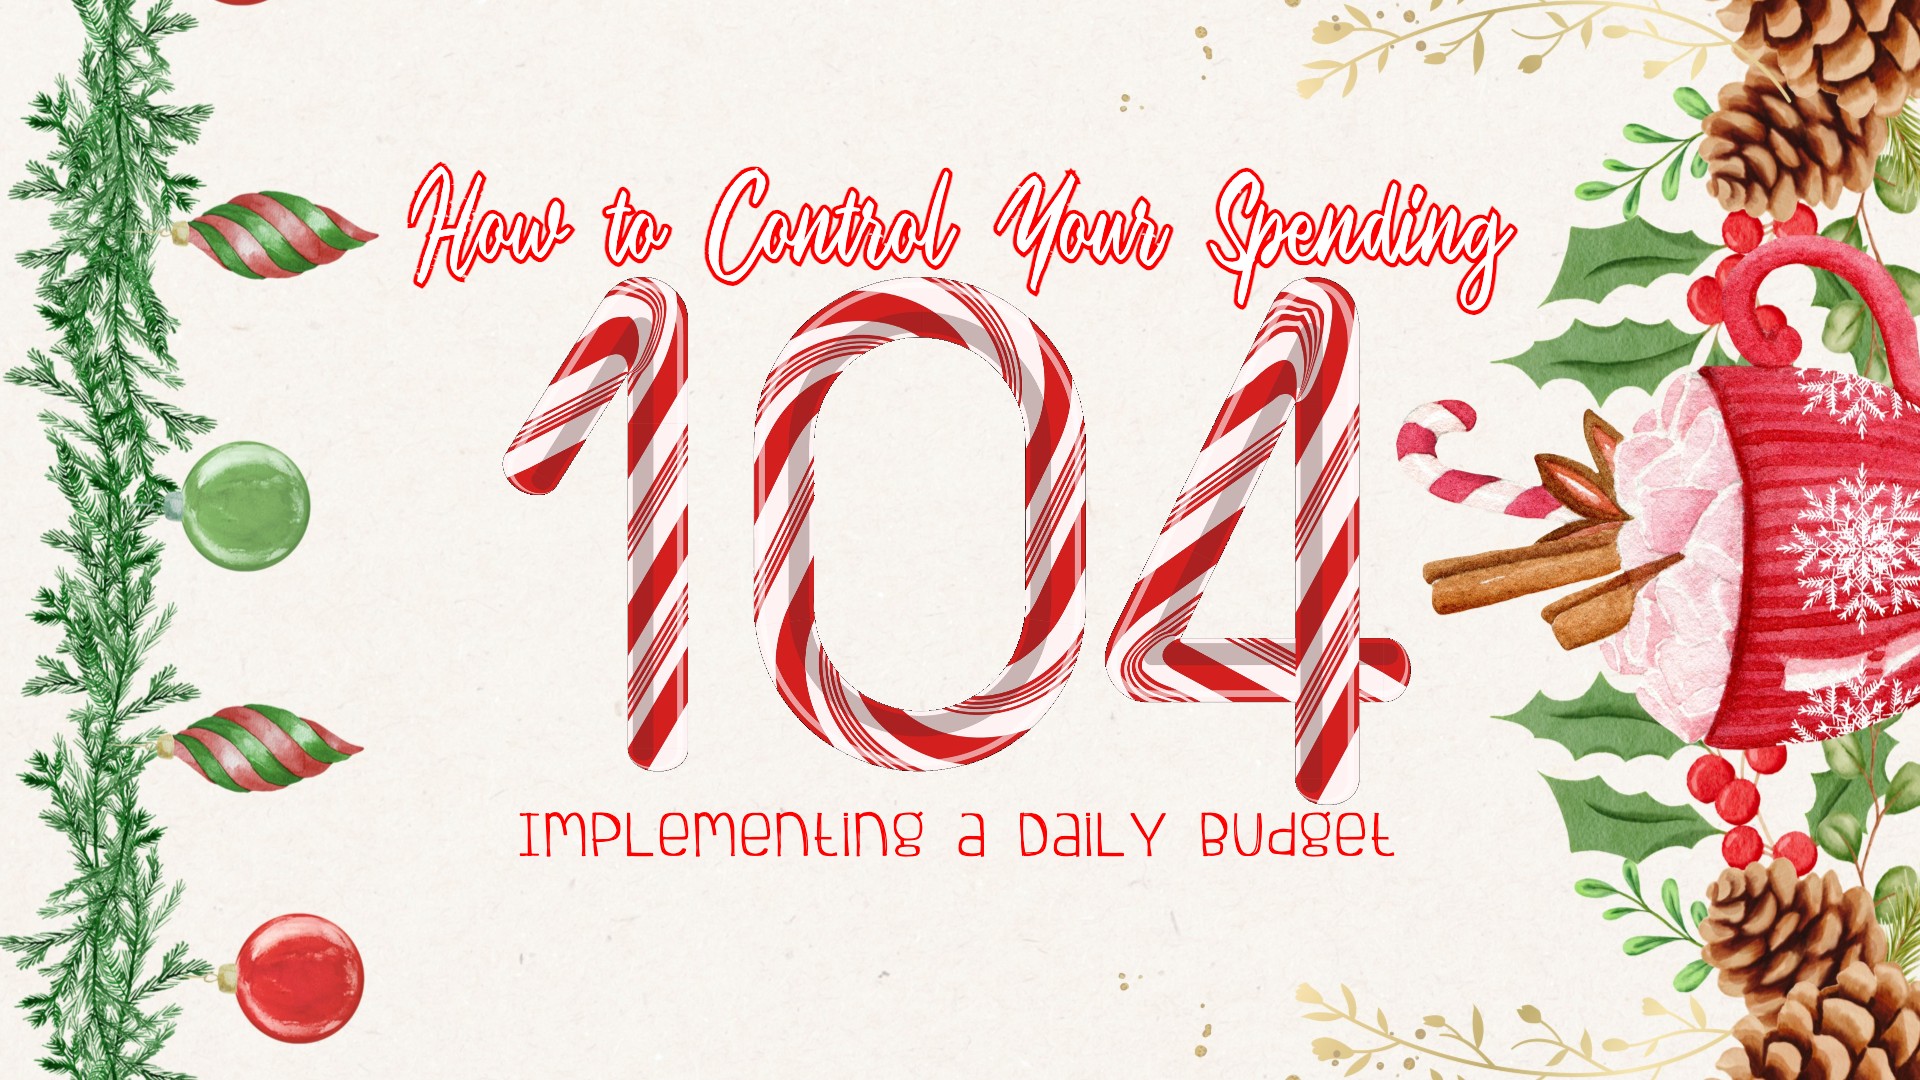 How to Control Your Spending 104: Implementing a Daily Budget